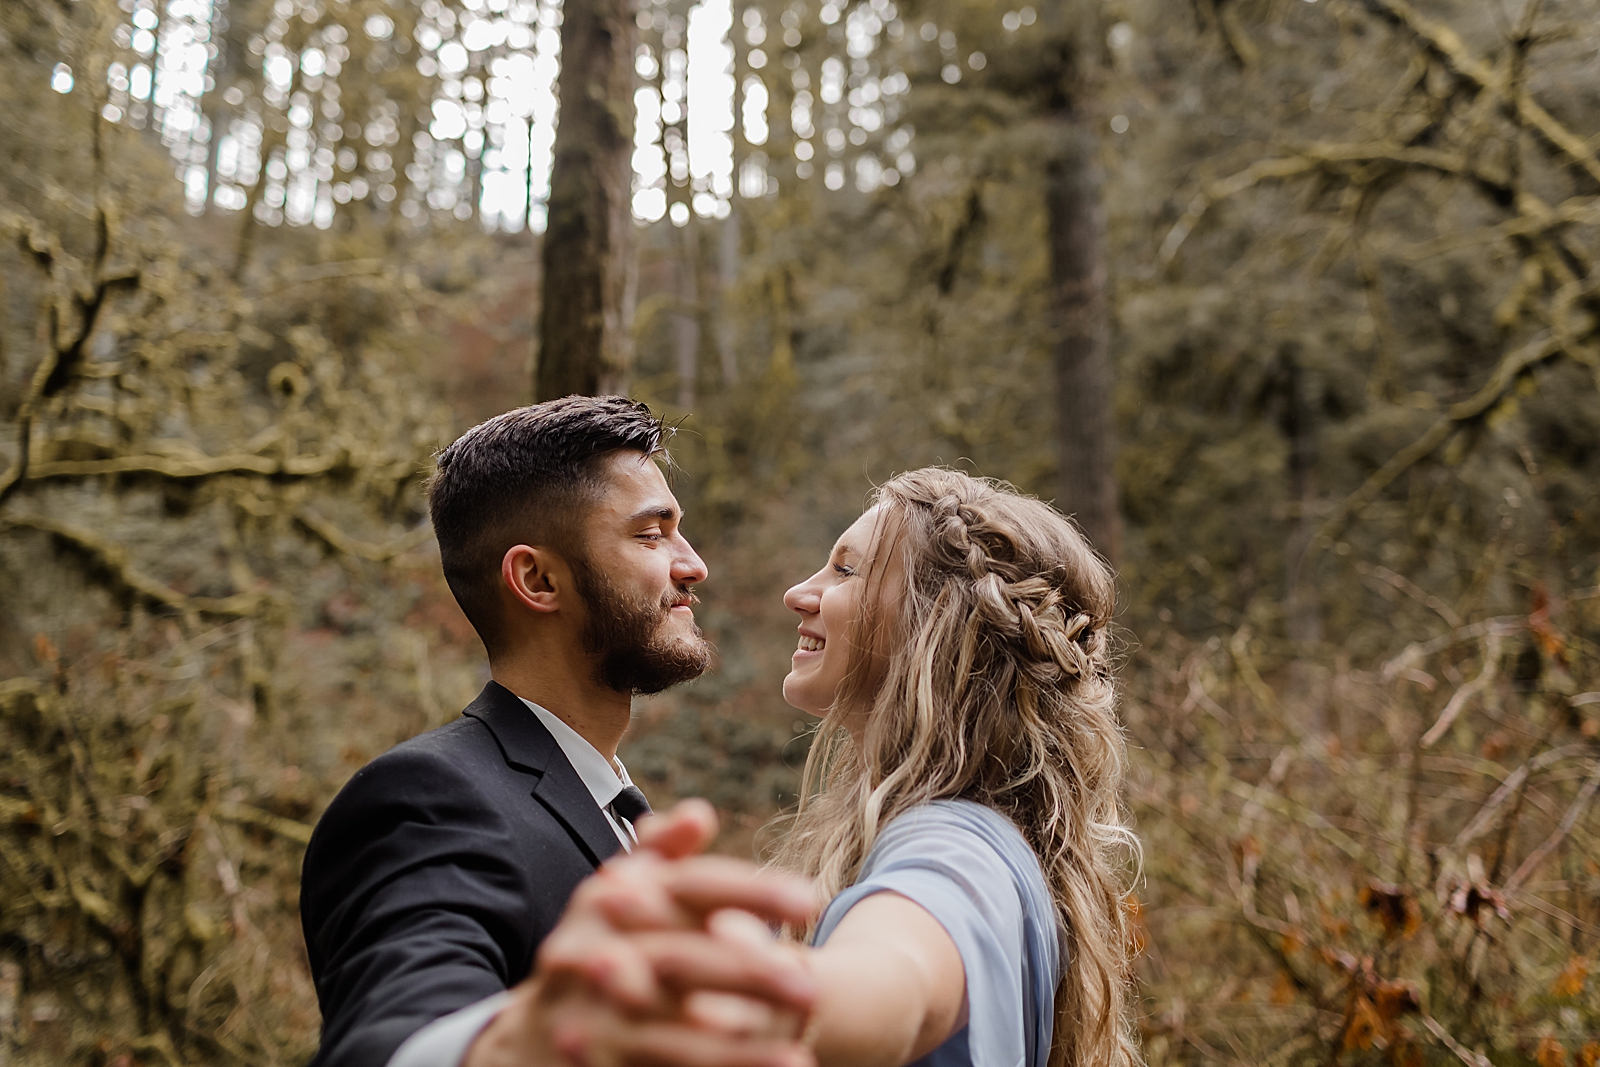 Couple dancing out in the forest Silver Falls State Park Oregon Adventure Photography captured by Simply Wandering Photography 